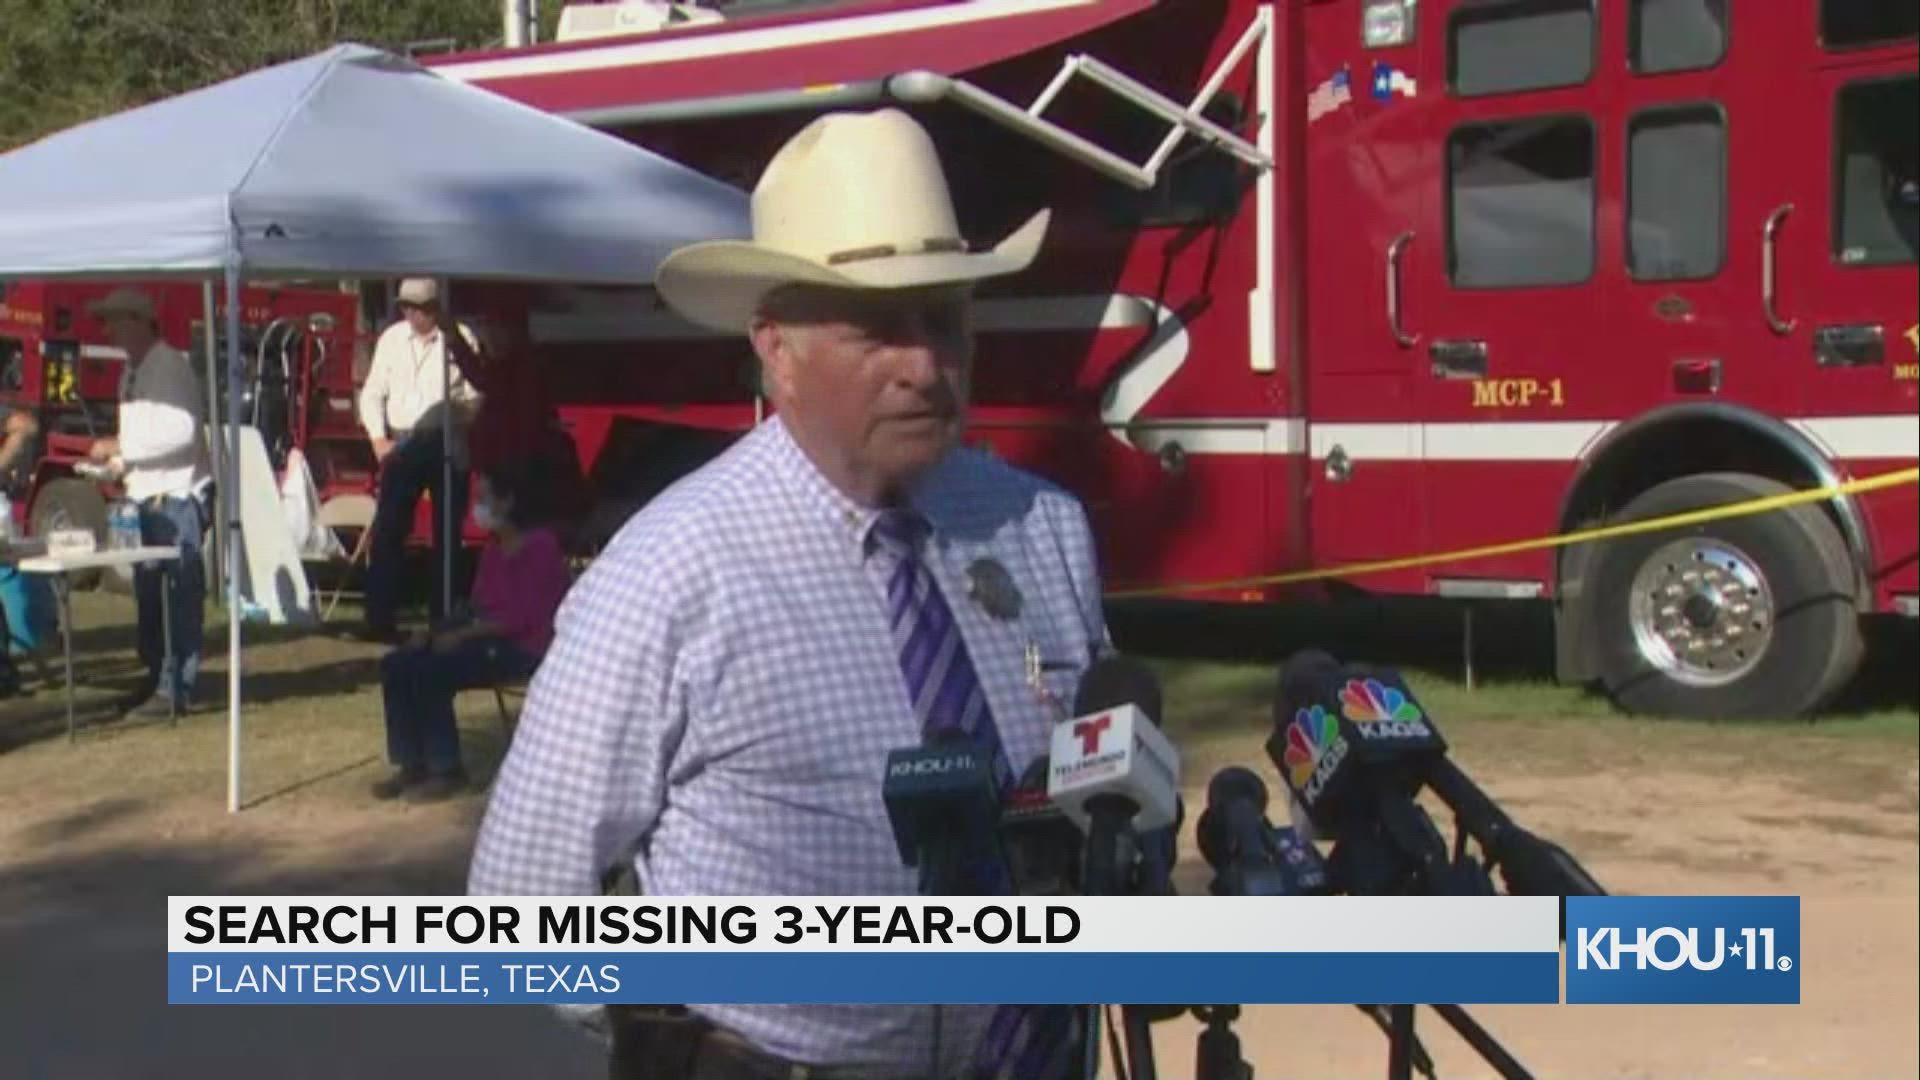 As of Friday afternoon, the Grimes County sheriff said there are no new developments in the search of missing 3-year-old Christopher Ramirez.